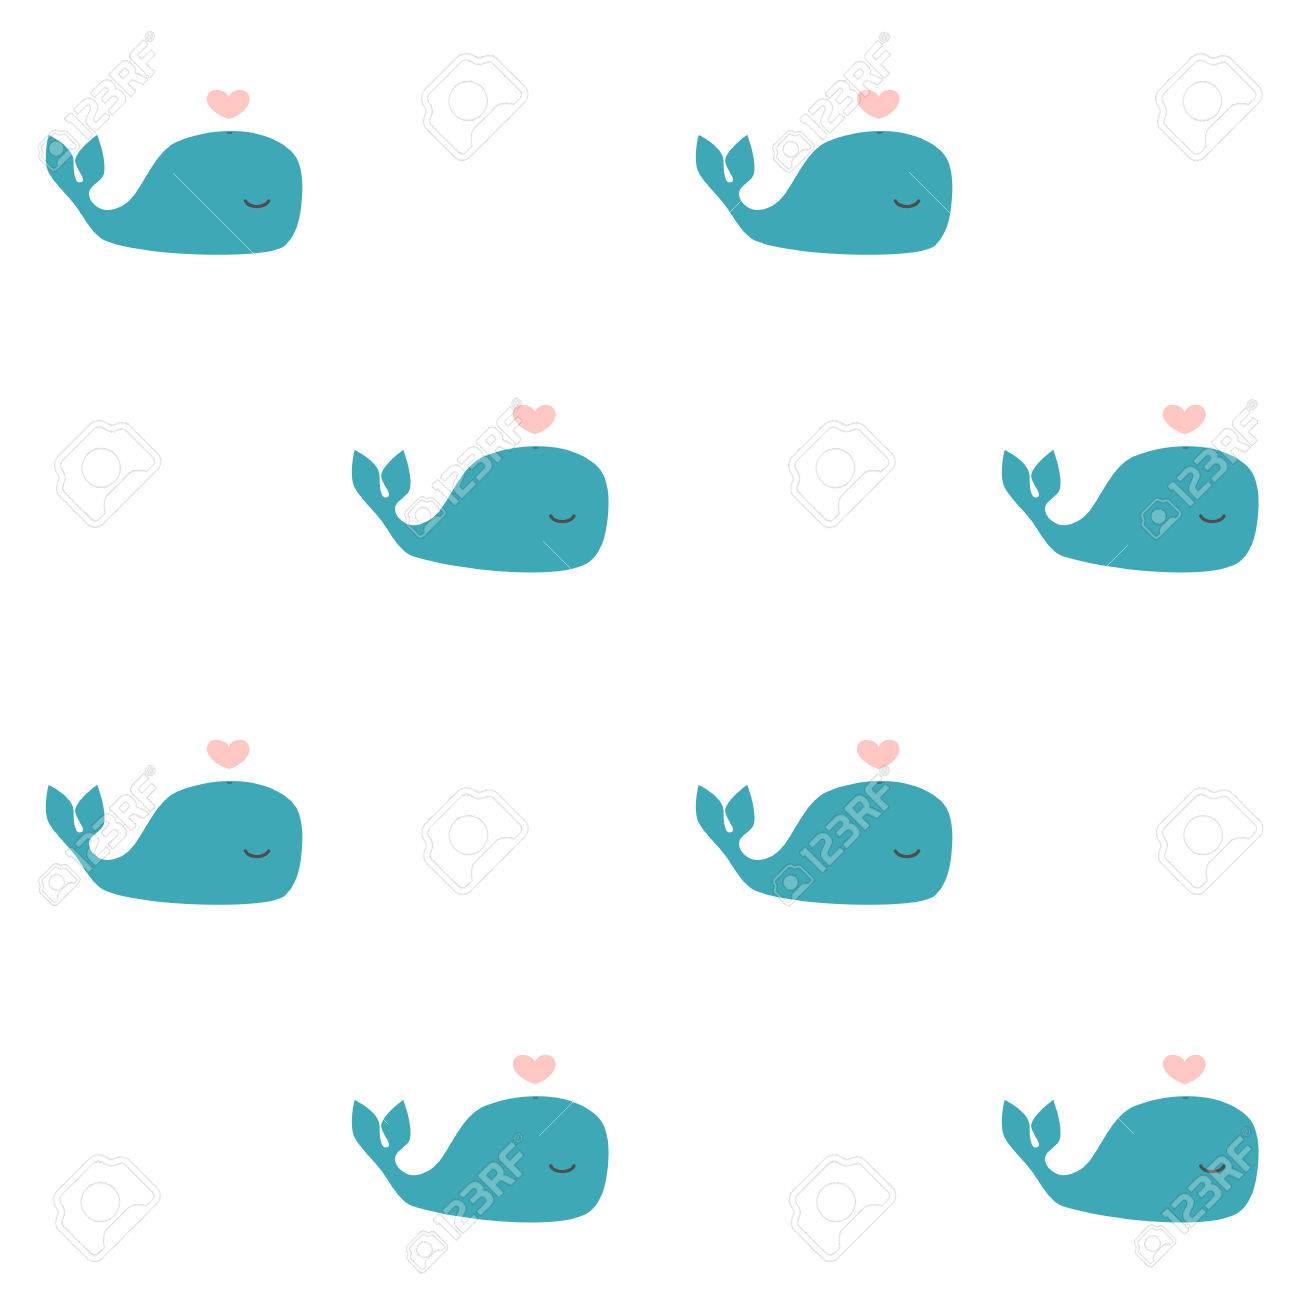 Cute Cartoon Whale Seamless Vector Background Pattern Illustration